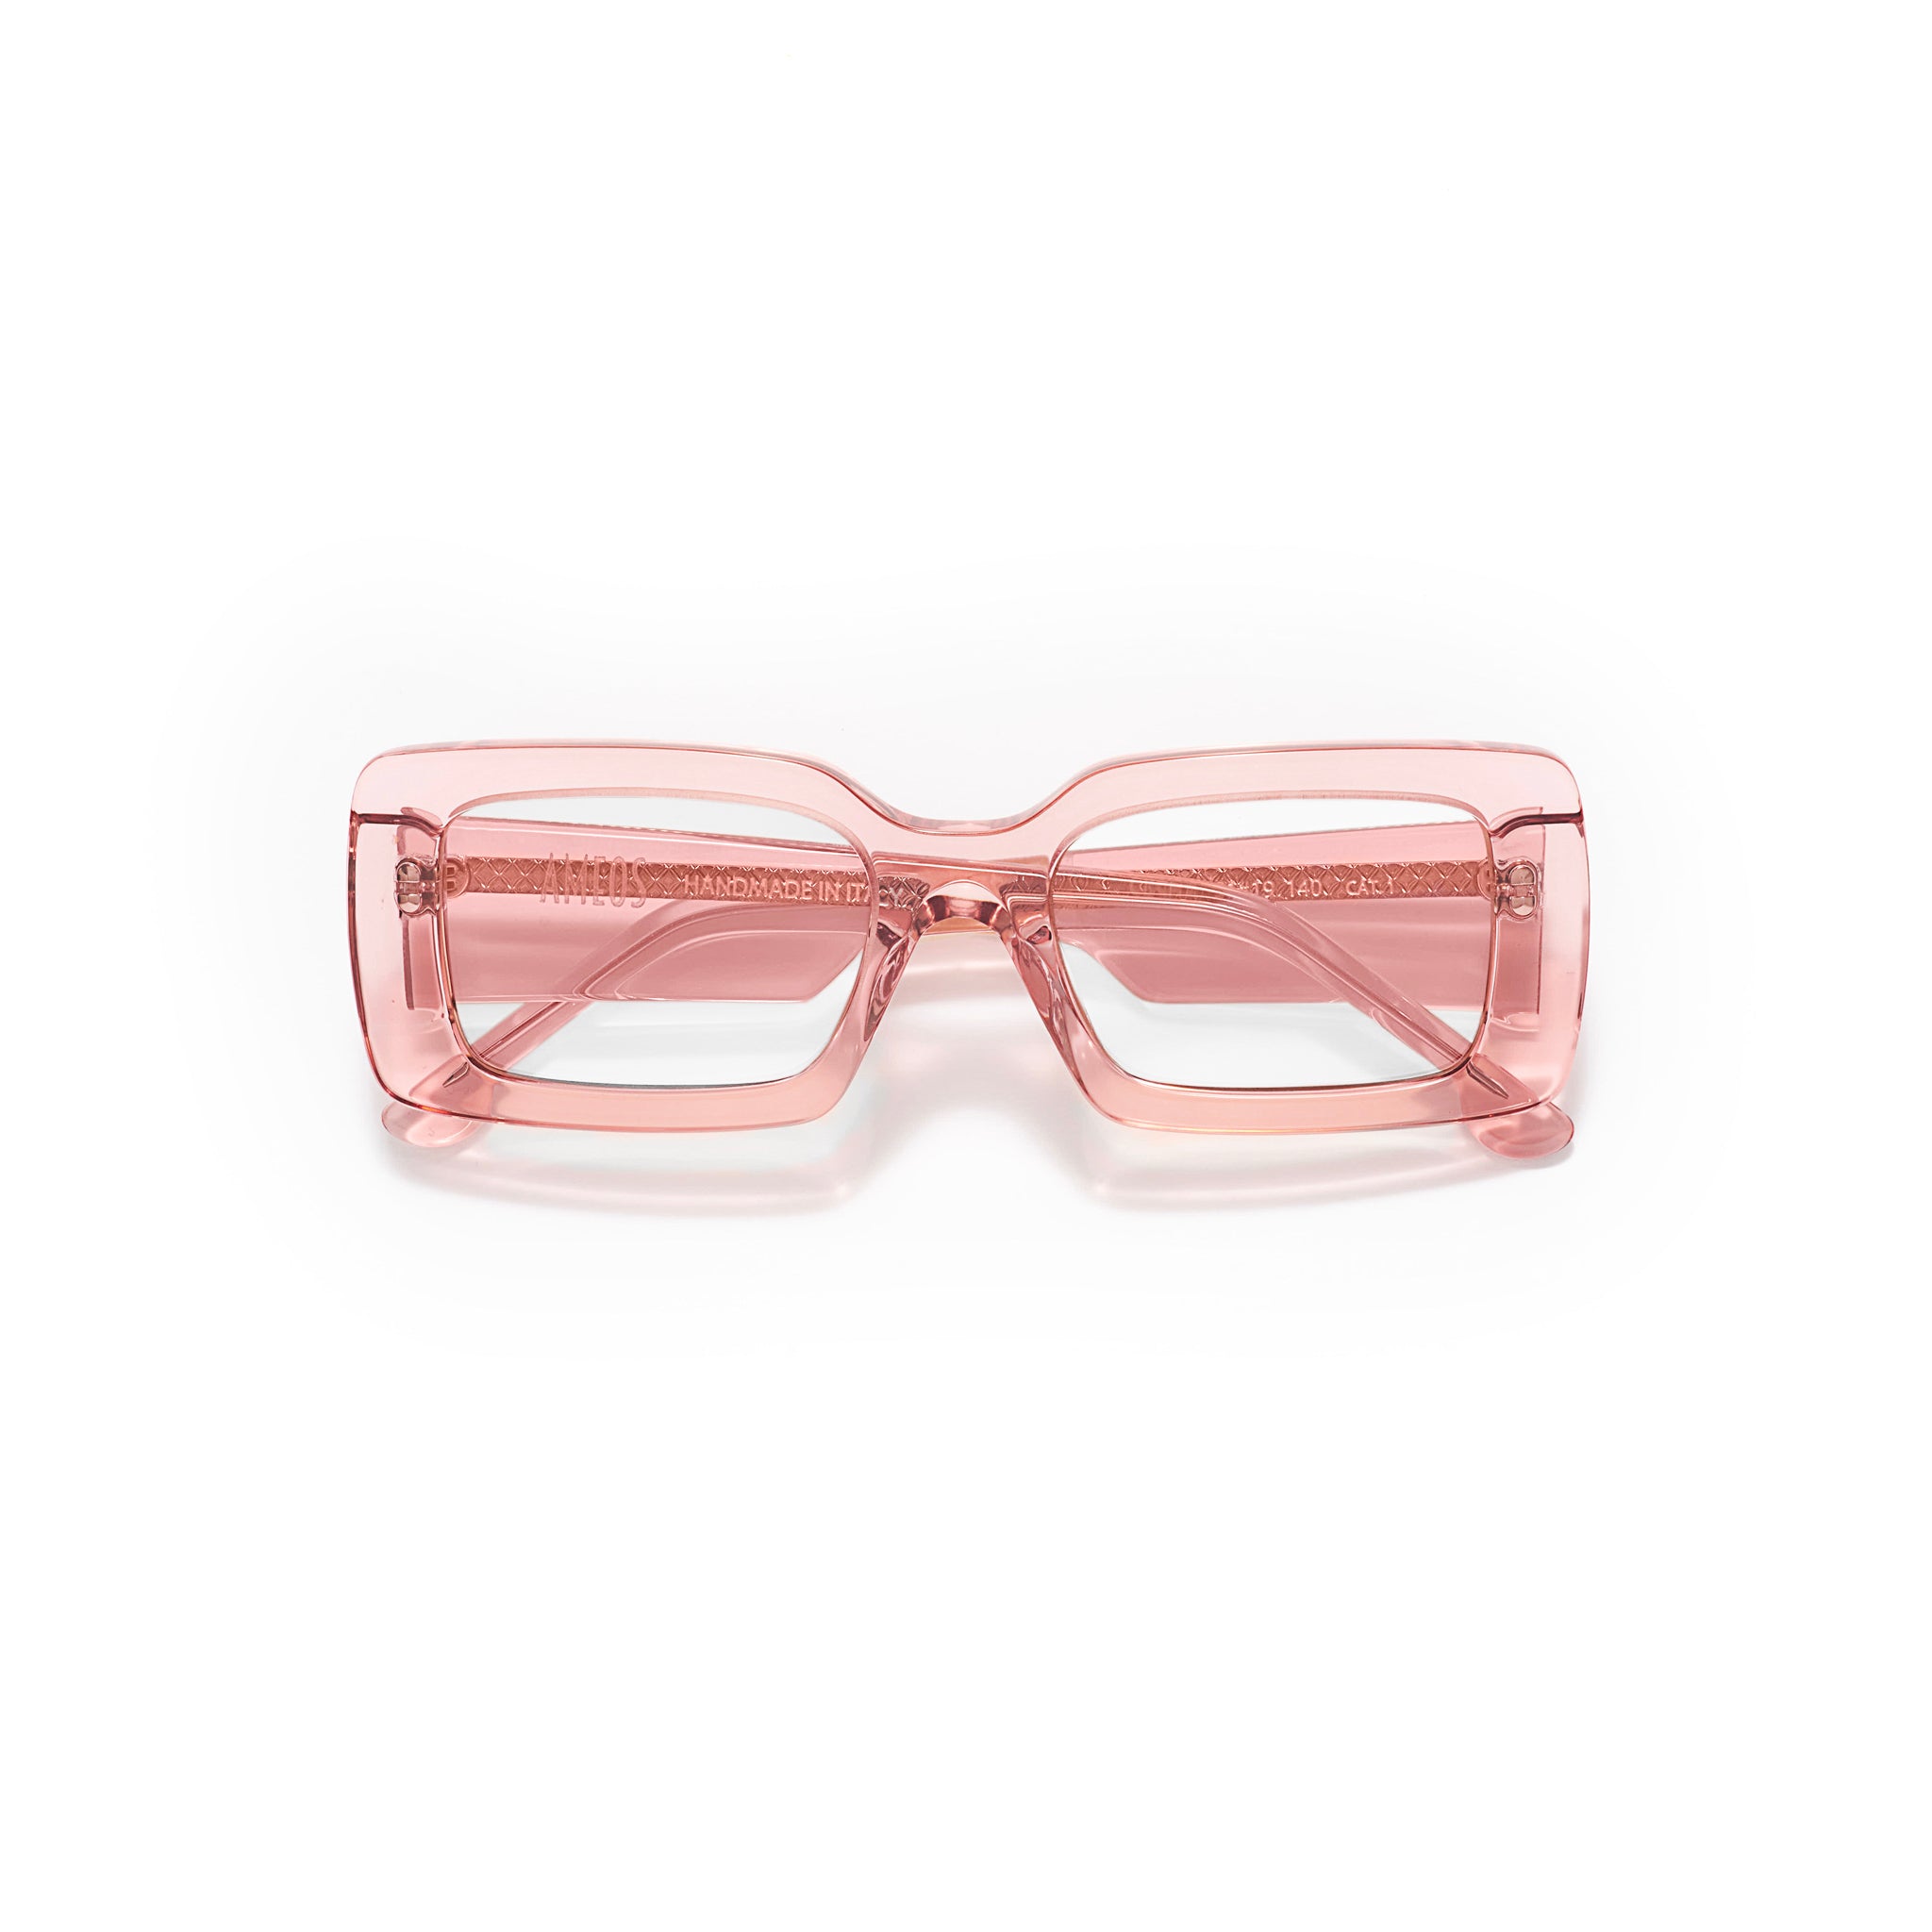 Ameos eyewear sasha optical glasses in pink transparent frames. Unisex and handmade in Italy.